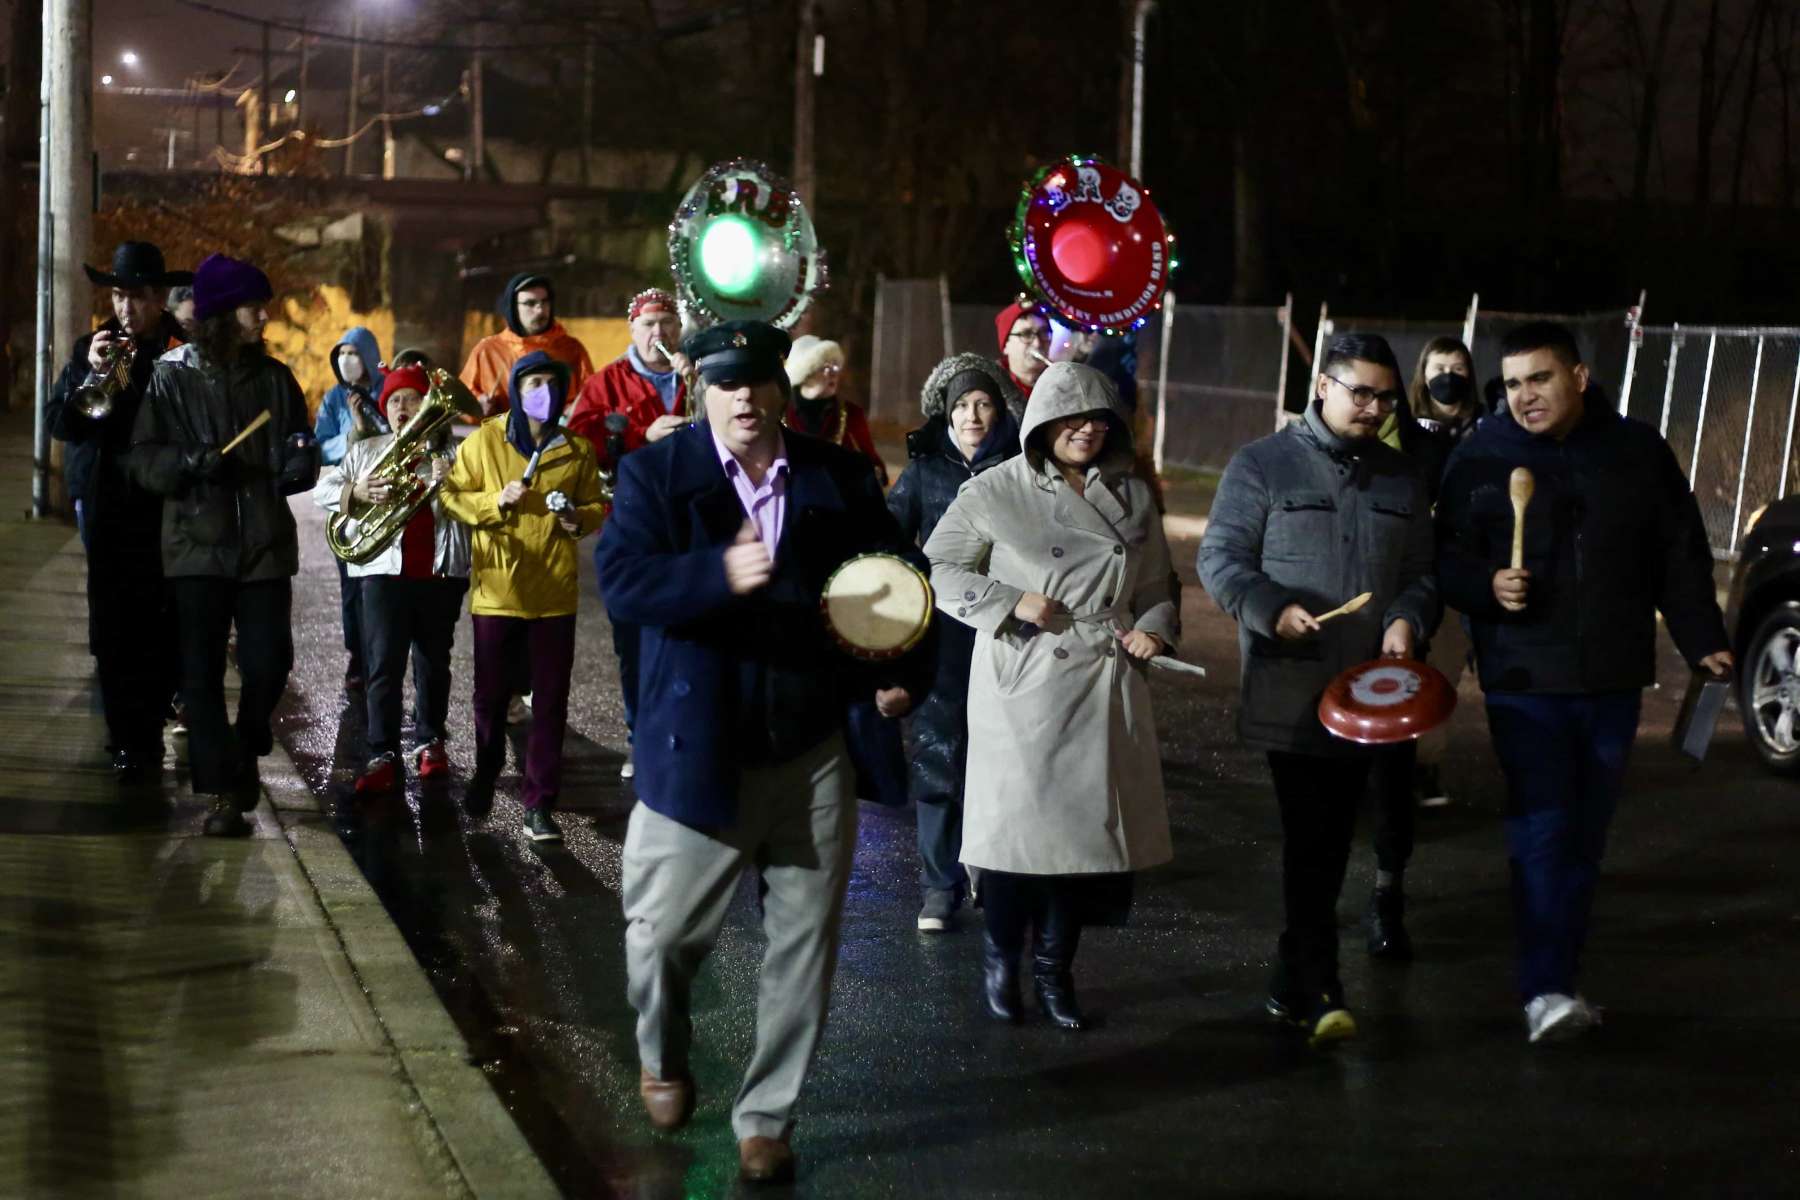 Rhode Island News: New Year’s Eve ‘noise demo’ at Wyatt prison shows incarcerated they are not forgotten